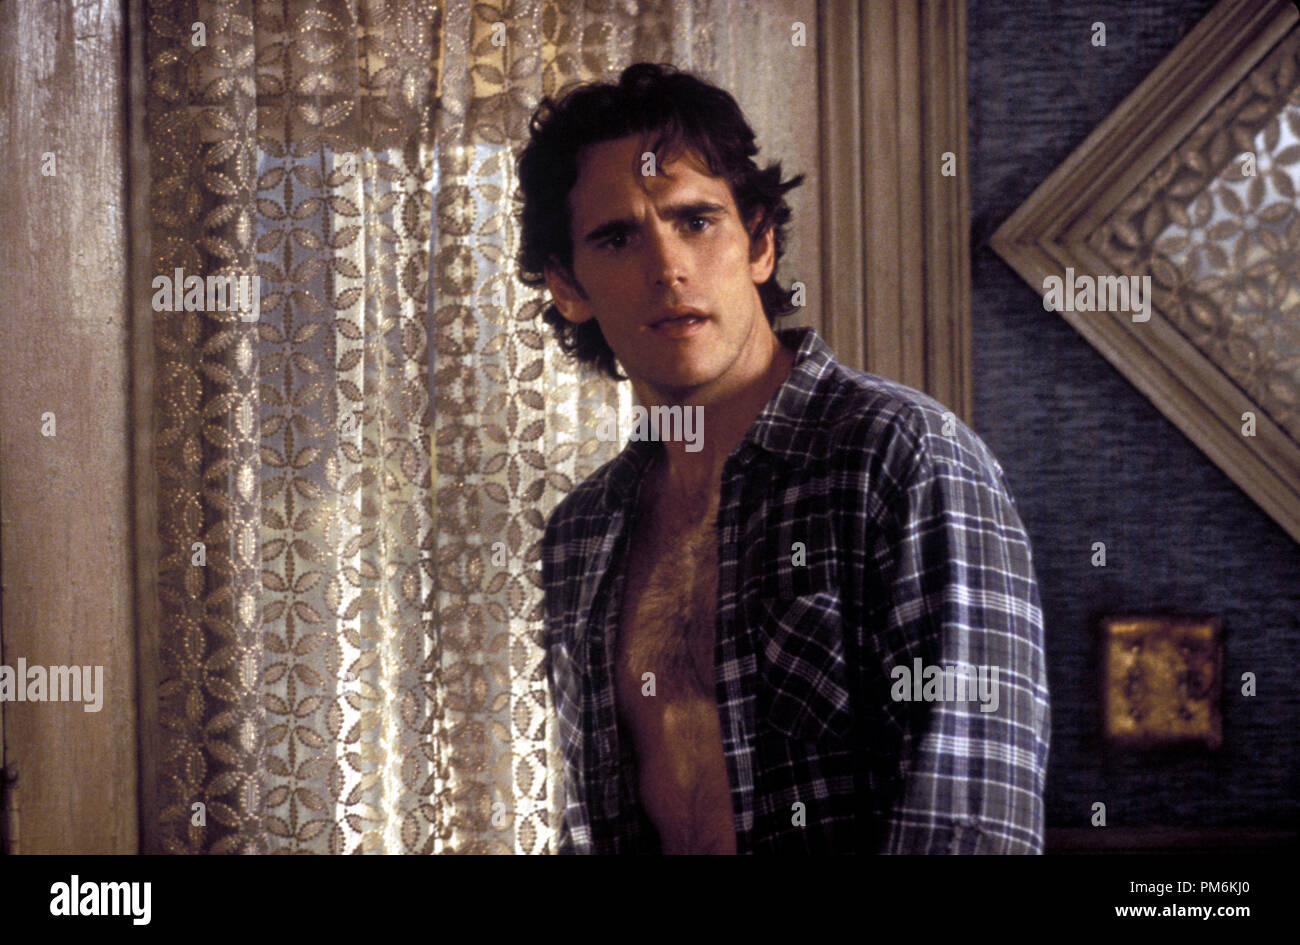 Film Still / Publicity Still from "One Night At McCool's" Matt Dillon ©  2001 USA Films Photo credit: Jamie Midgley File Reference # 30847597THA For  Editorial Use Only - All Rights Reserved Stock Photo - Alamy